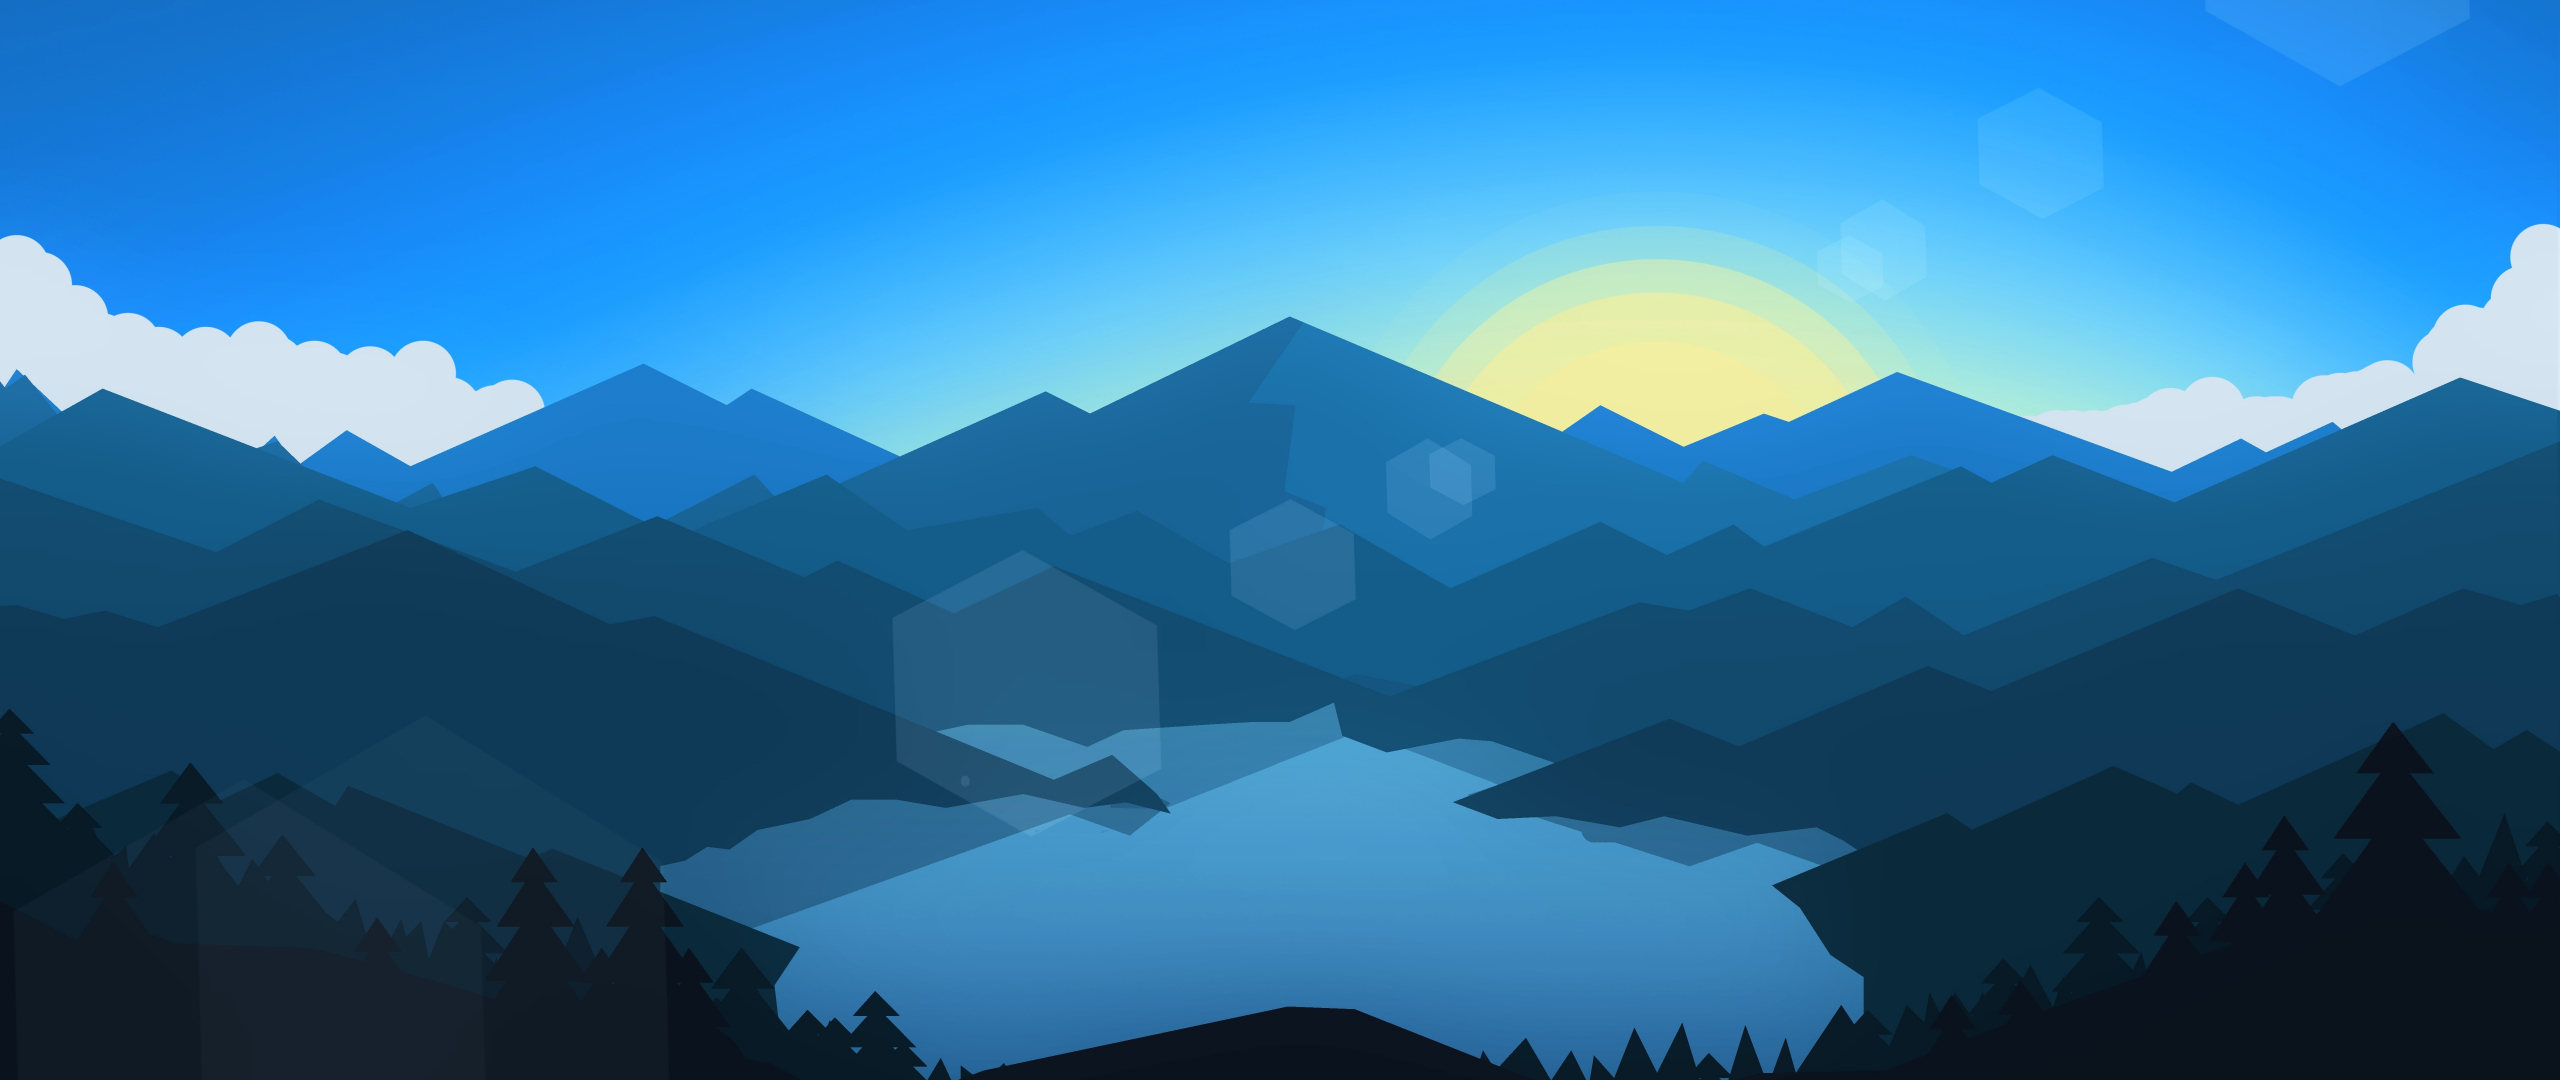 Download wallpaper 2560x1080 forest, mountains, sunset, cool weather,  minimalism, dual wide 2560x1080 hd background, 246